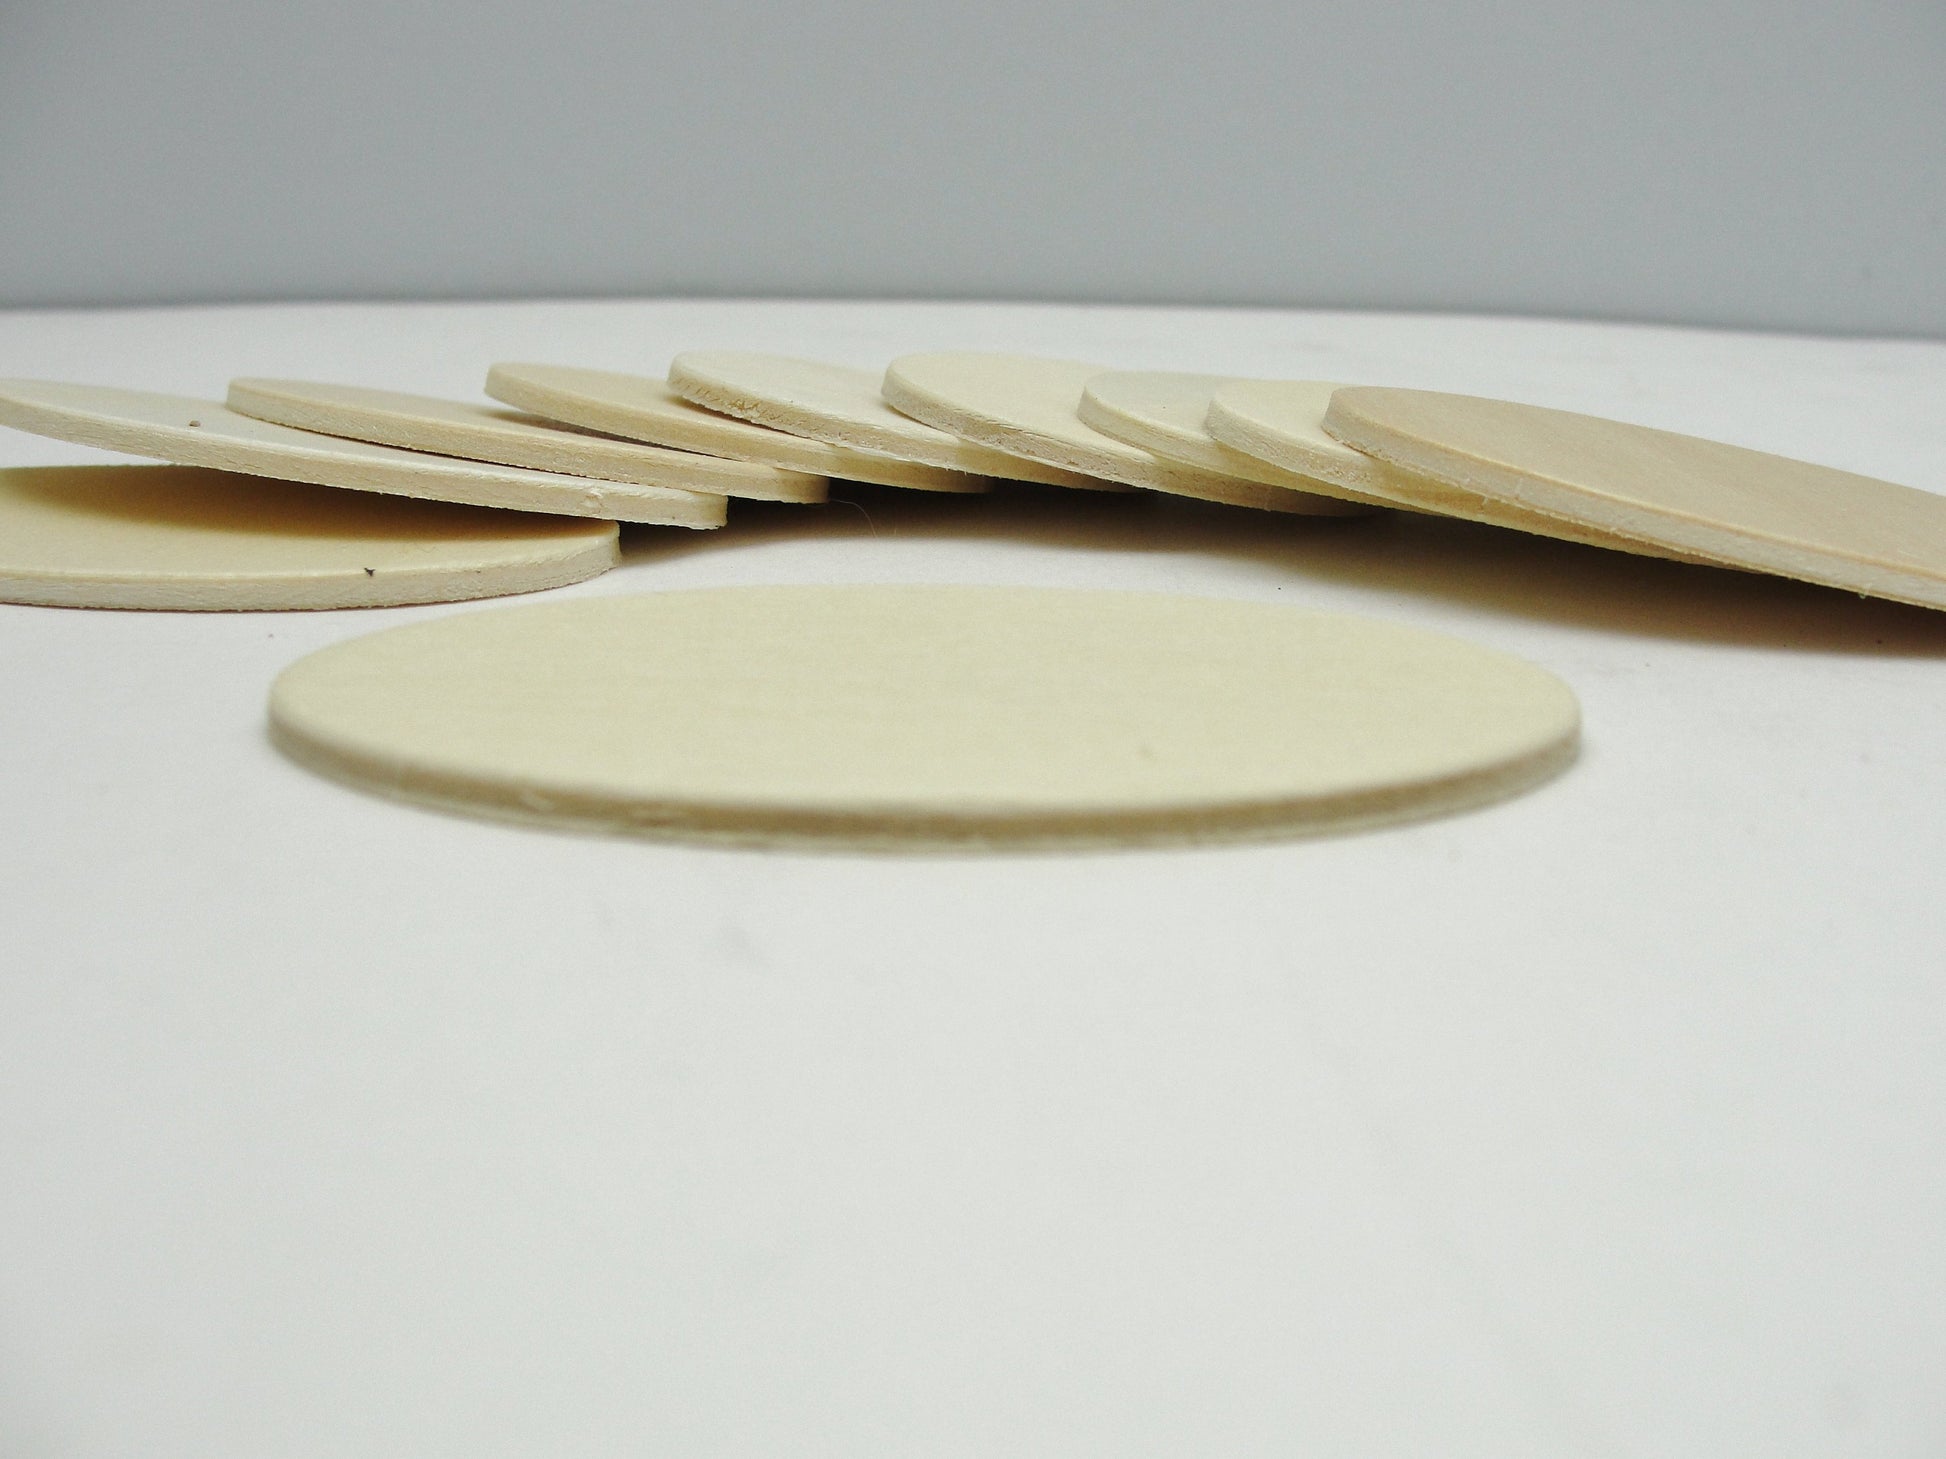 Wood oval disc 2 3/4" x 1 3/4" set of 10 - Wood parts - Craft Supply House